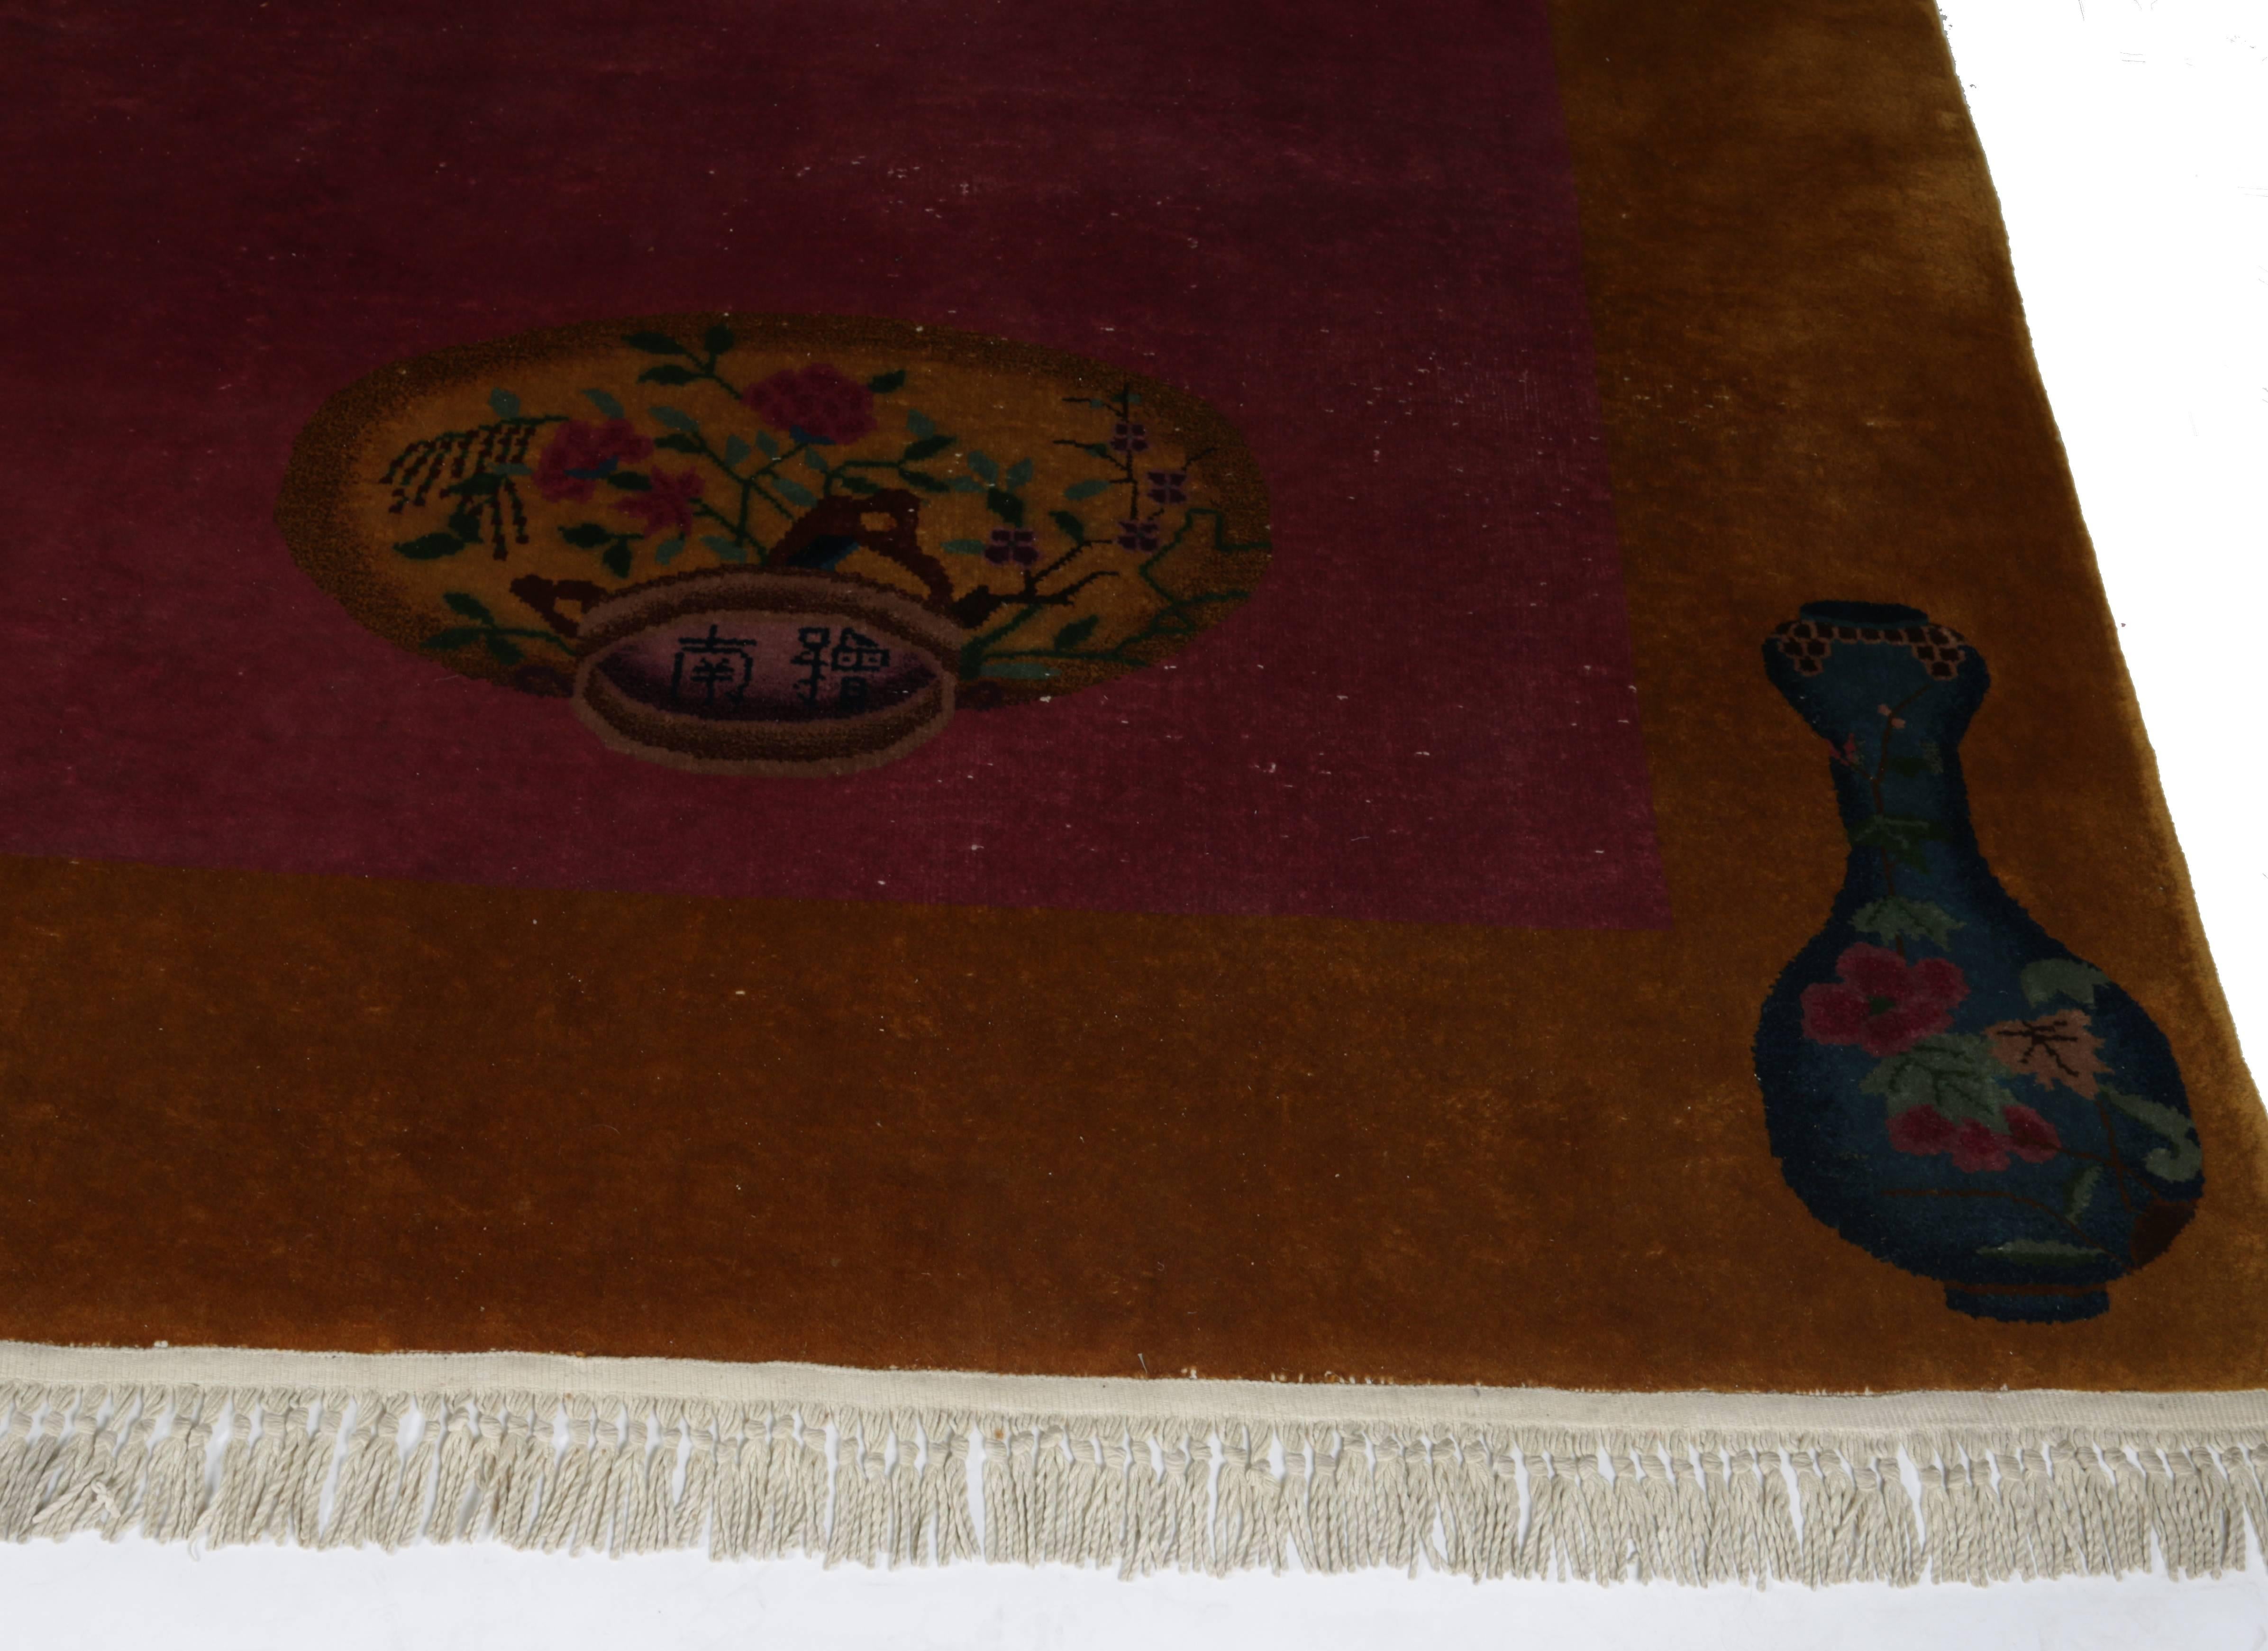 A splendid Minimalist Chinese Art Deco rug with a trompe l'oeil design of a pot and another trompe l'oeil design next to it depicting the bottom of the pot showing a signature. All in all a surrealist and three-dimensional rich deep burgundy colored